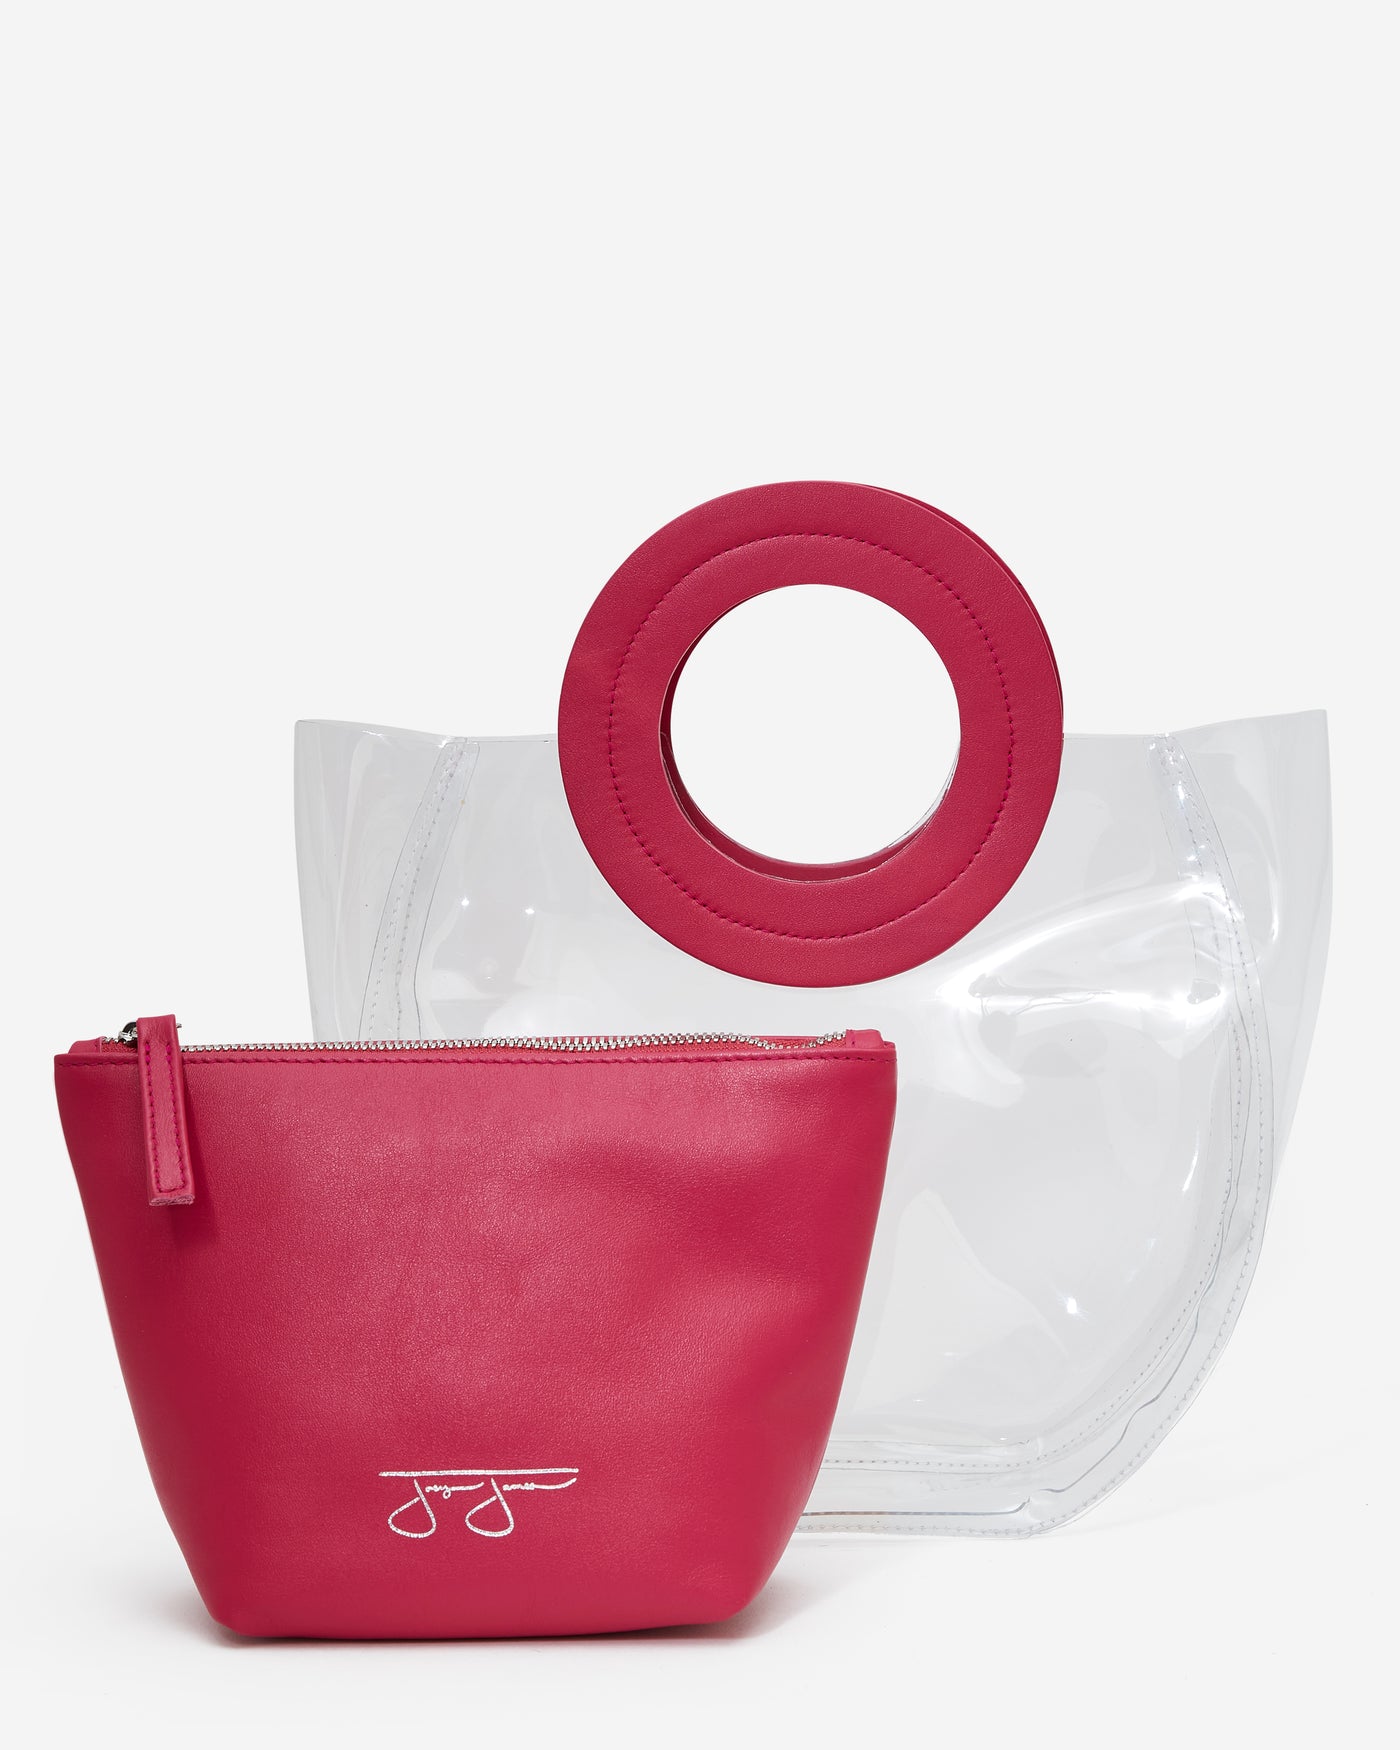 Lacey Bag - Raspberry Lacey Clear Bag Joey James, The Label   